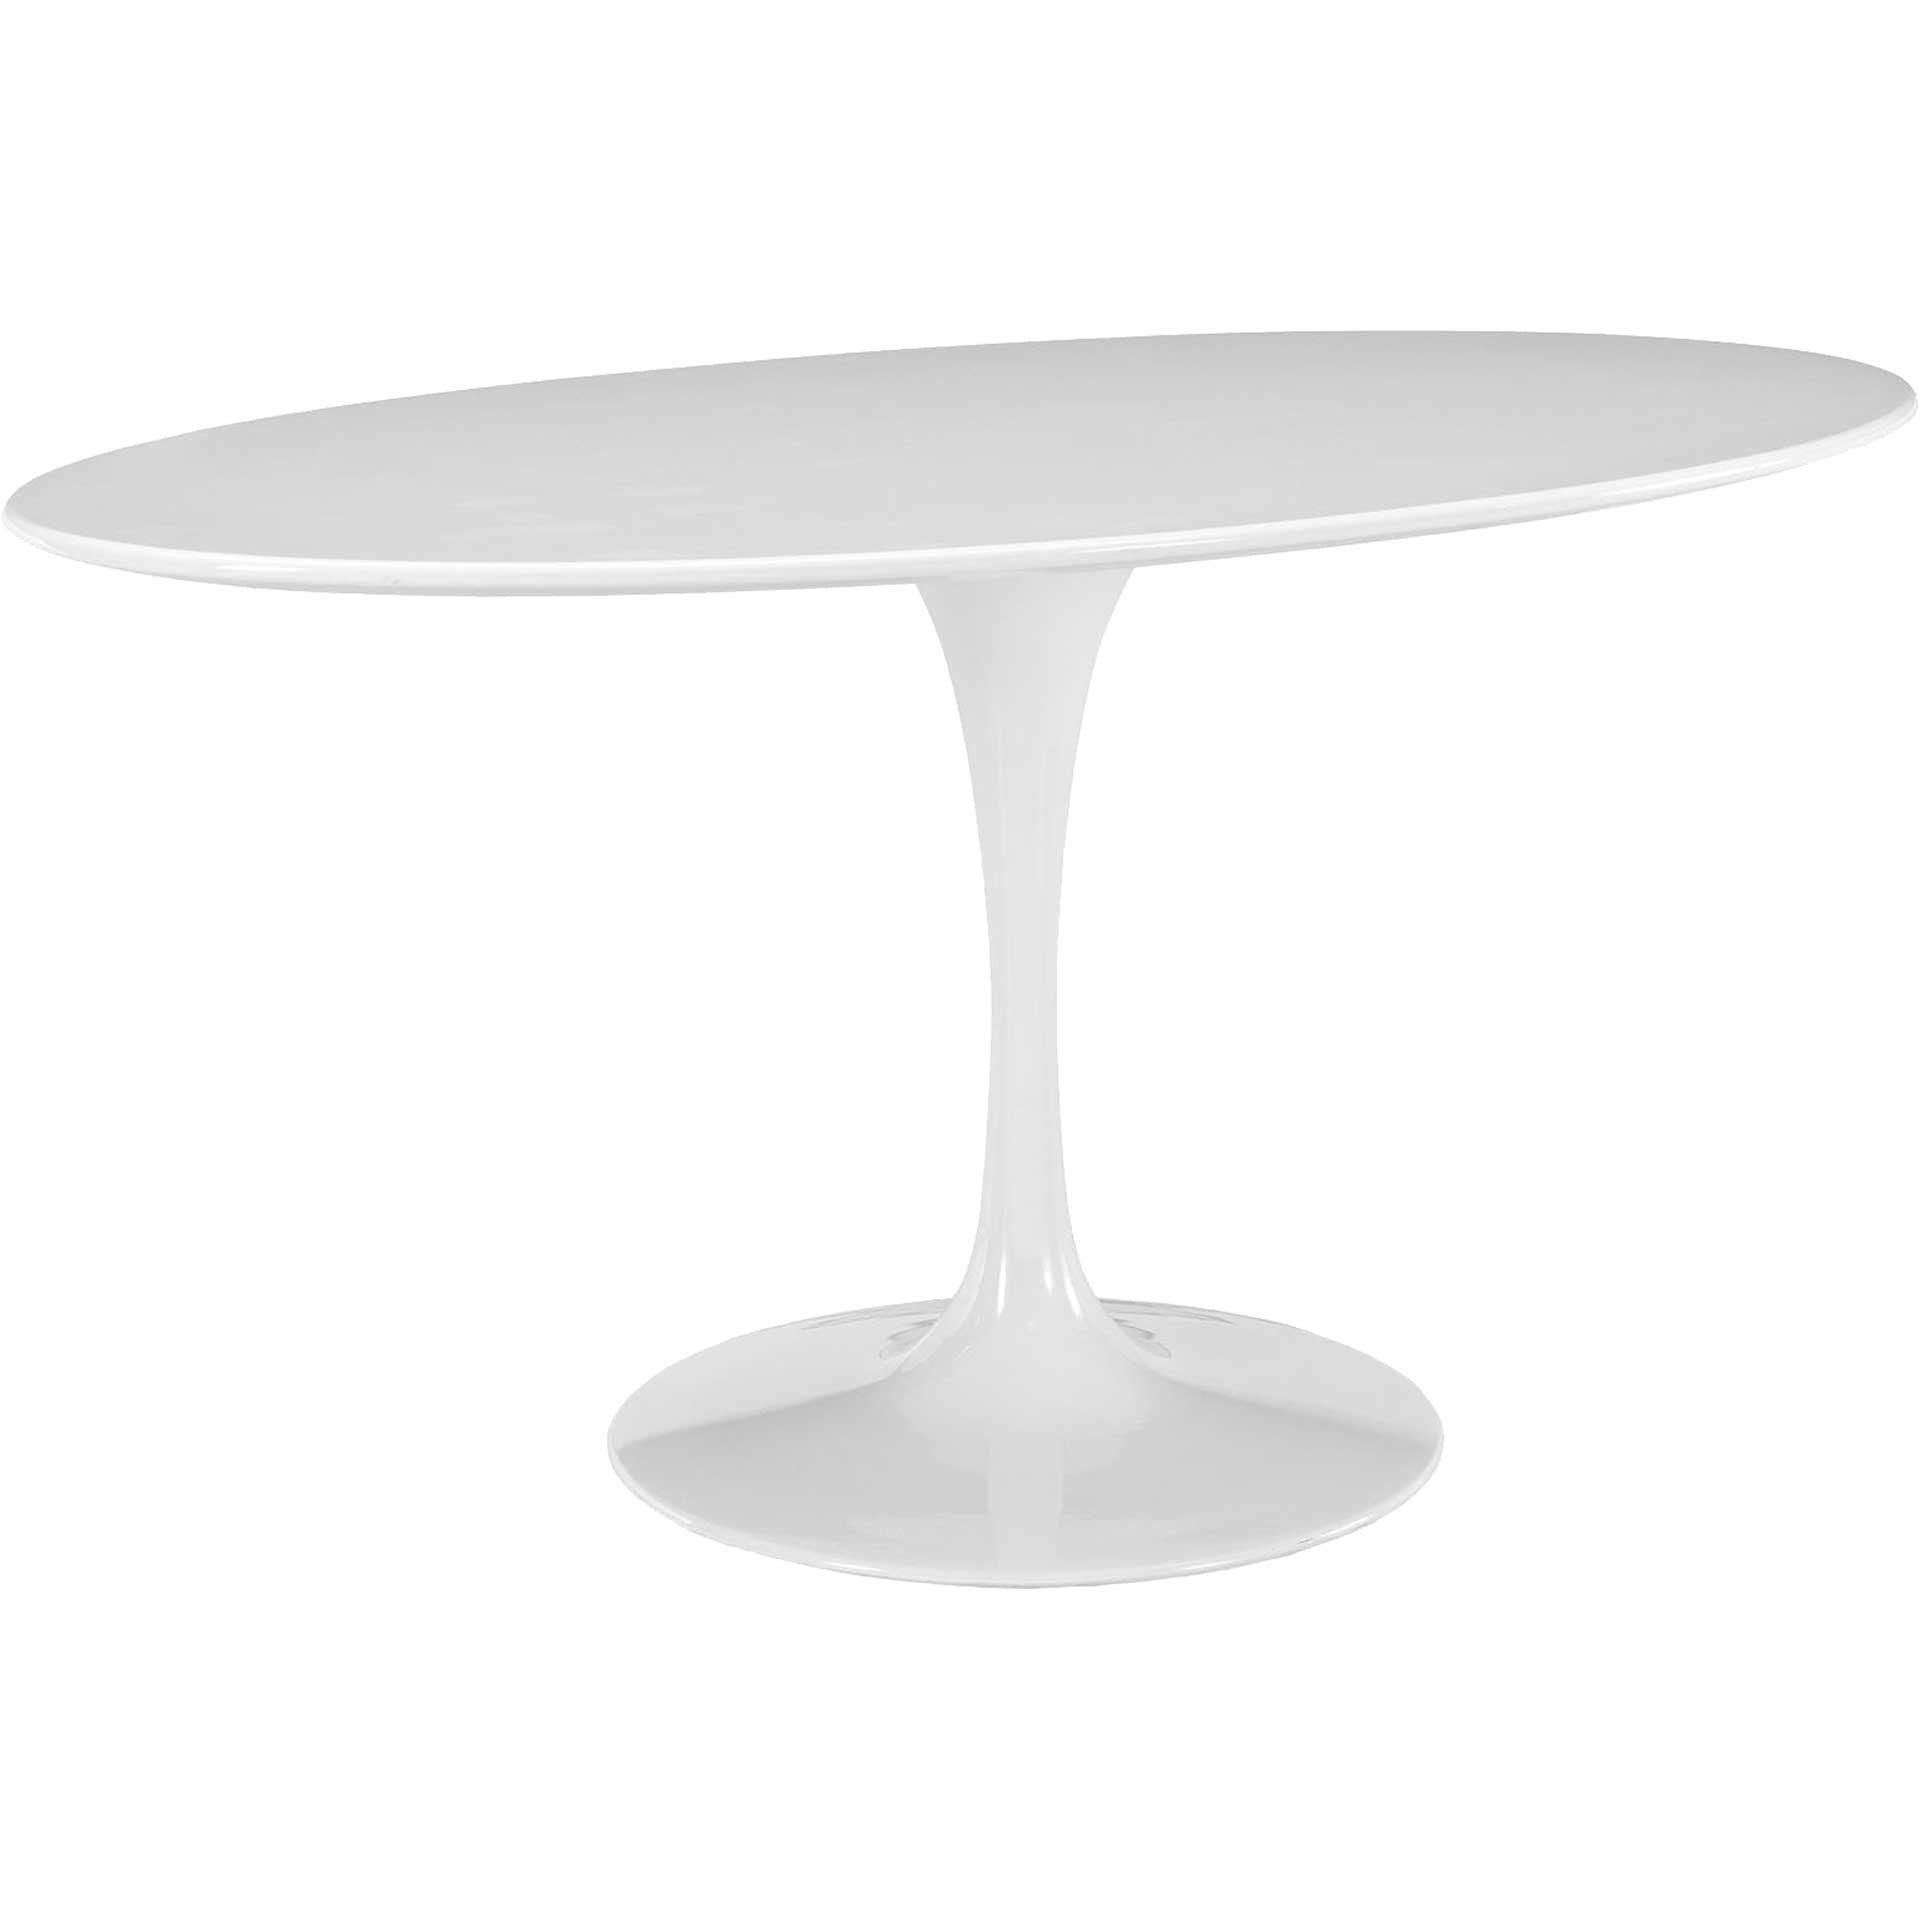 Lore Oval Dining Table White